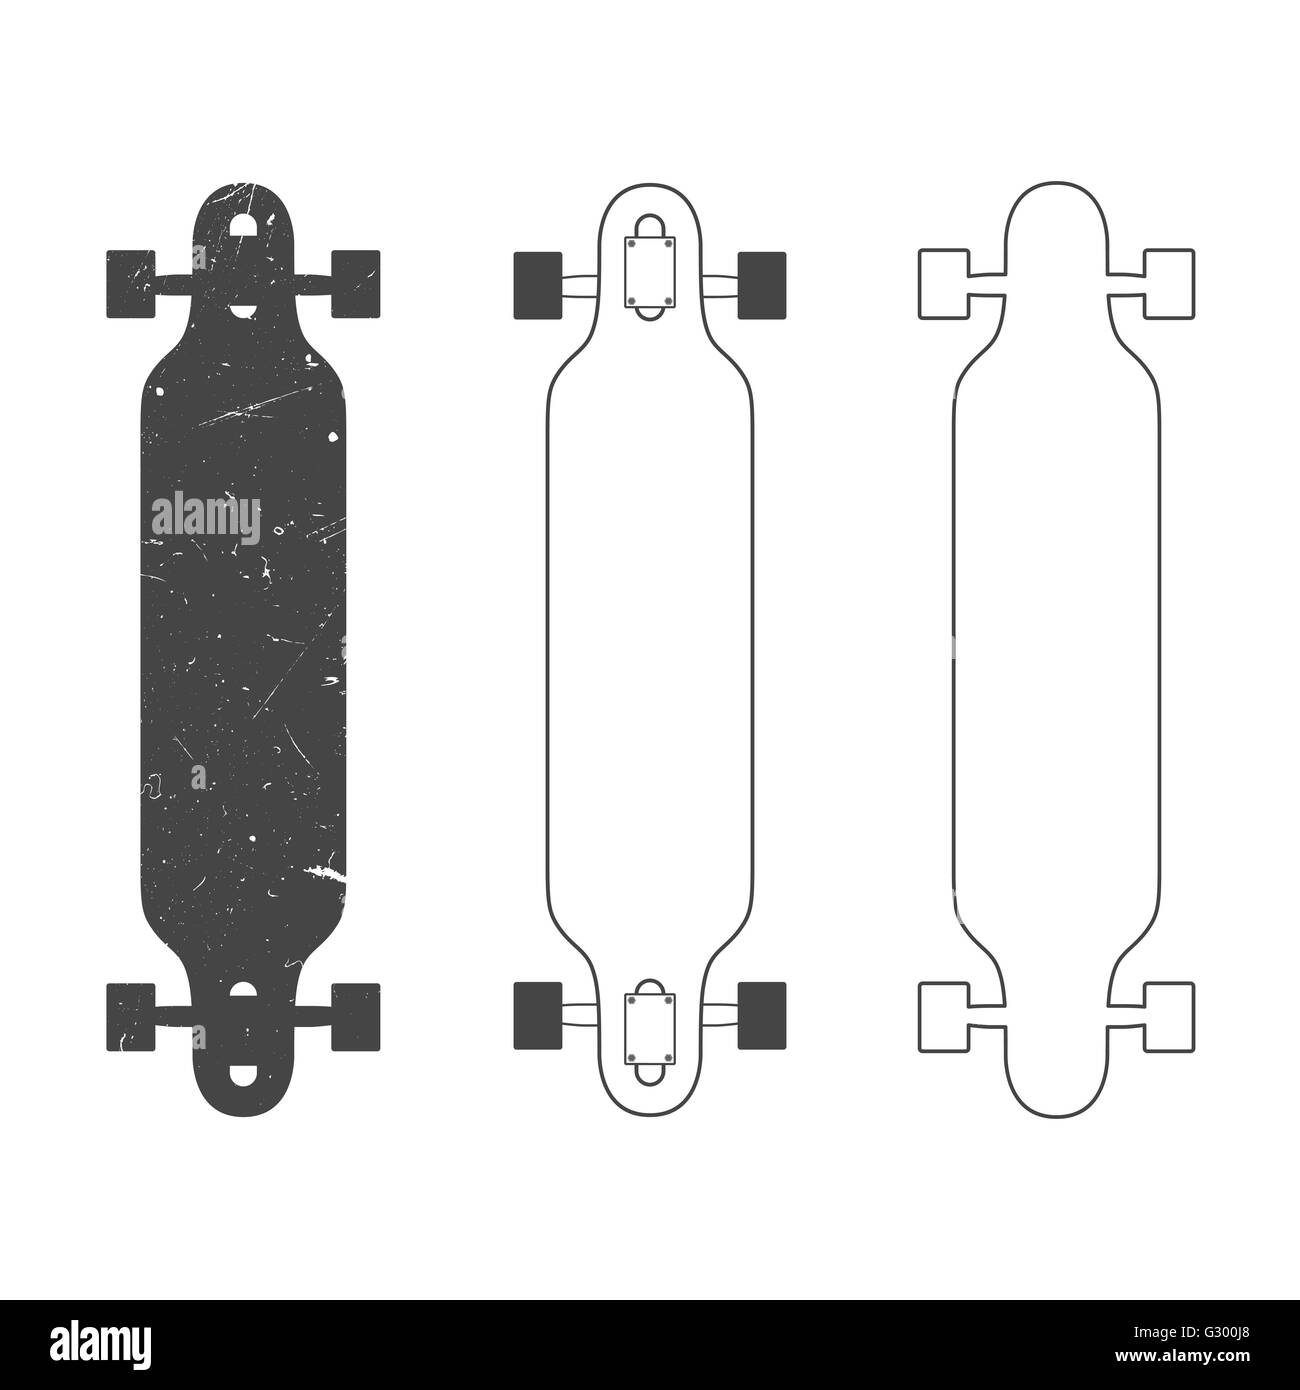 Longboard Deck Black and White Stock Photos & Images - Alamy